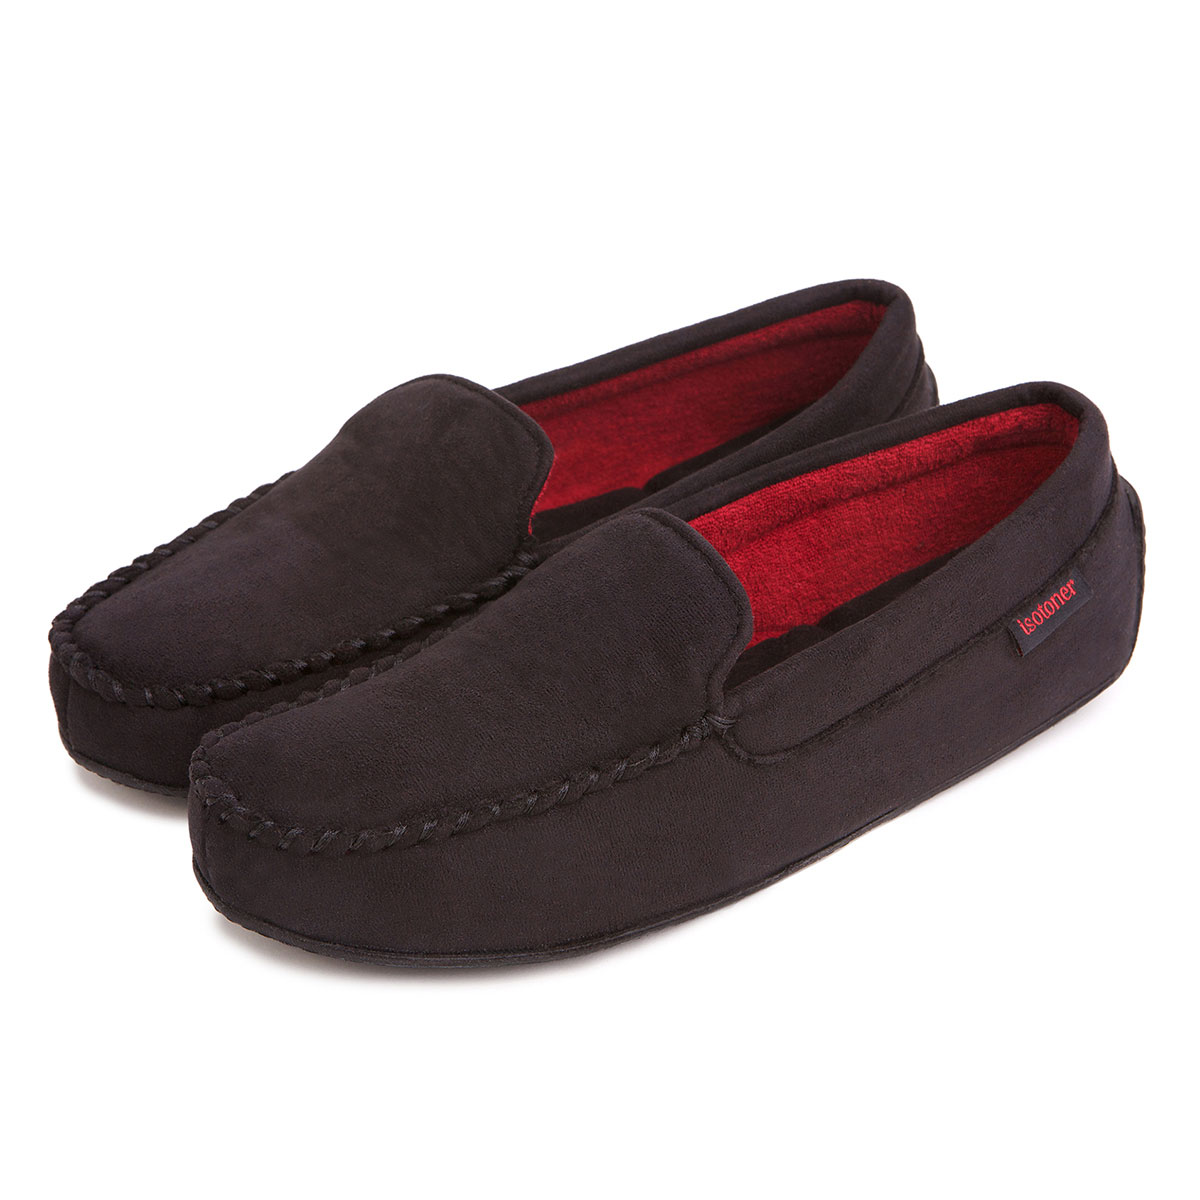 isotoner Mens Pillowstep Driving Moccasin Slippers | eBay